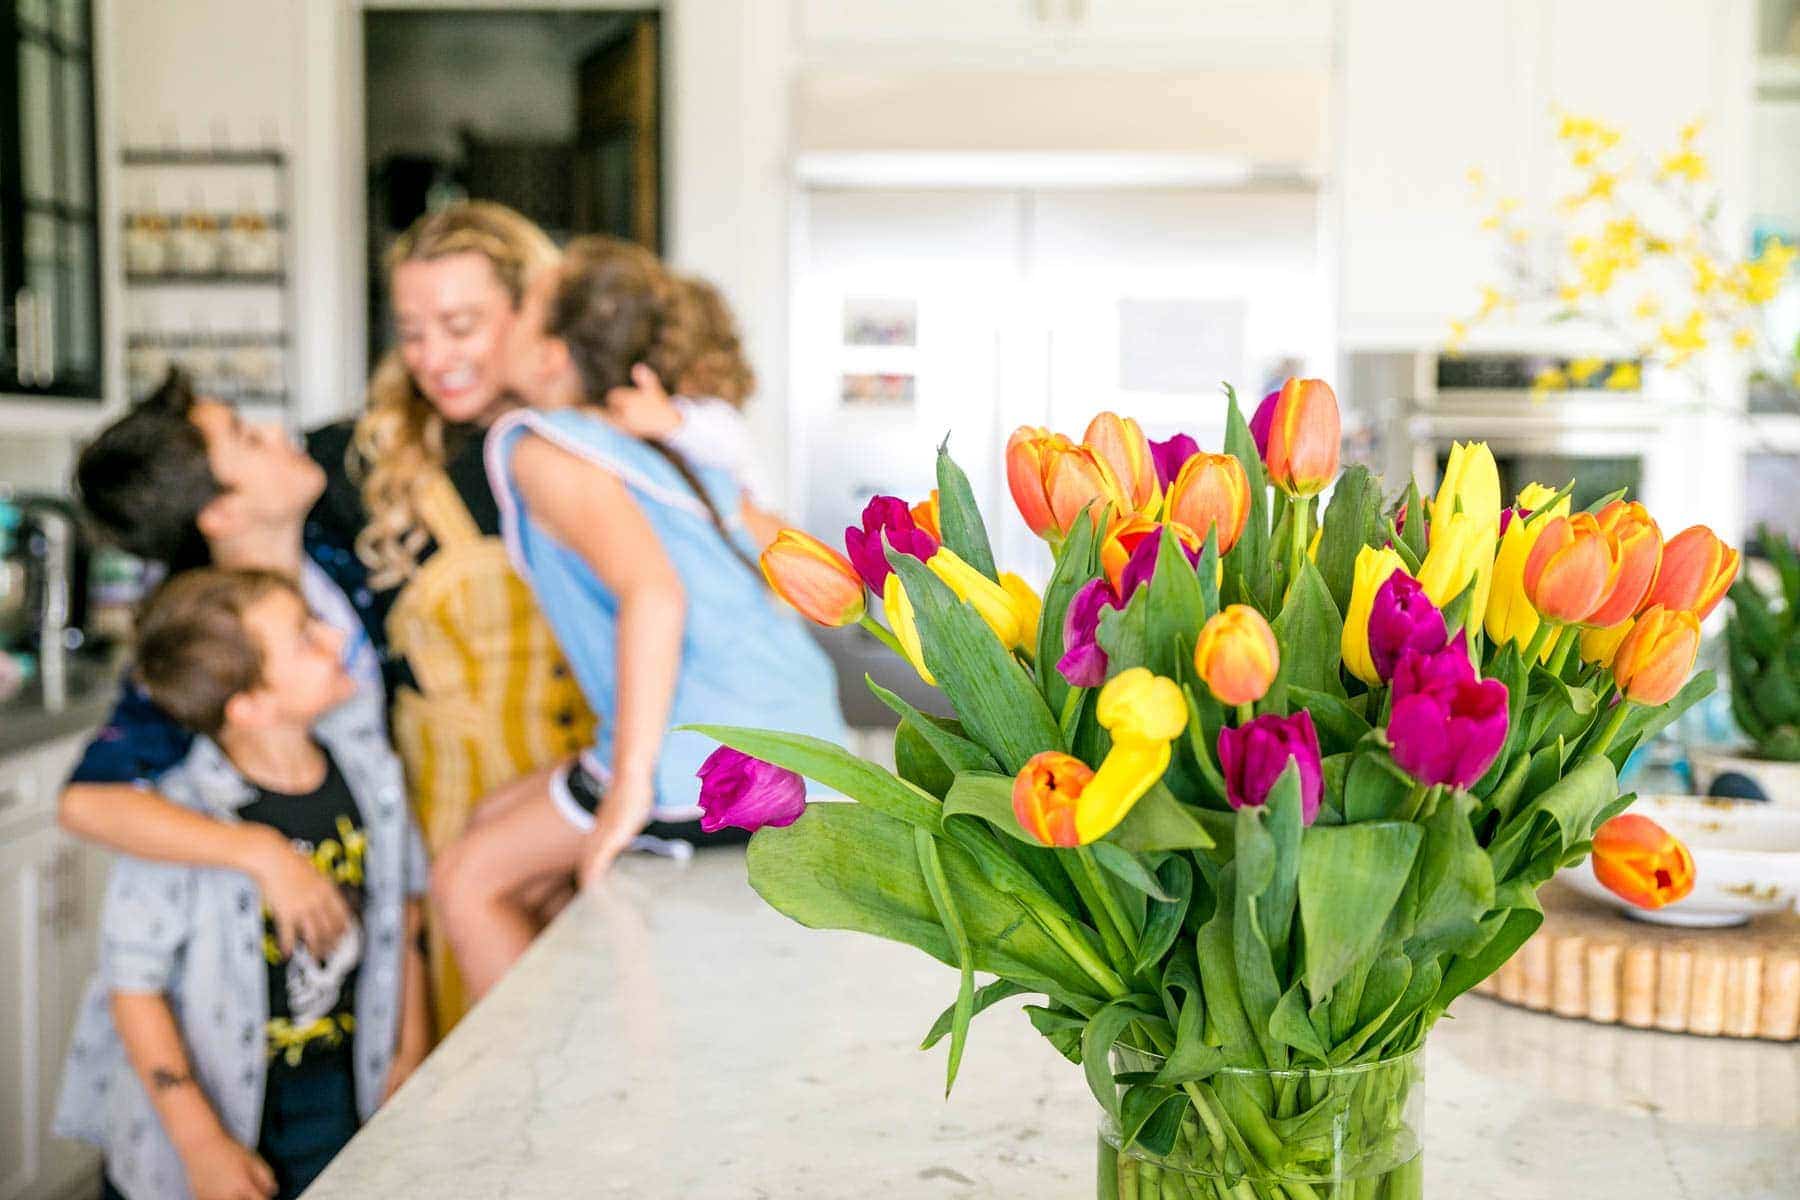 For more than 40 years, 1-800-Flowers.com® has been putting smiles on the faces of moms near and far for Mother’s Day. Recently unveiling their 2018 Mother’s Day collection with a broad range of price points, 1-800-Flowers.com makes it so easy to provide magic moments to those who matter the most! #mothersday #mothersdaygiftguide #bestflowersformom #flowerarrangments #flowers #giftingflowers #flowersfortable #tuliparrangements #citygirlgonemom